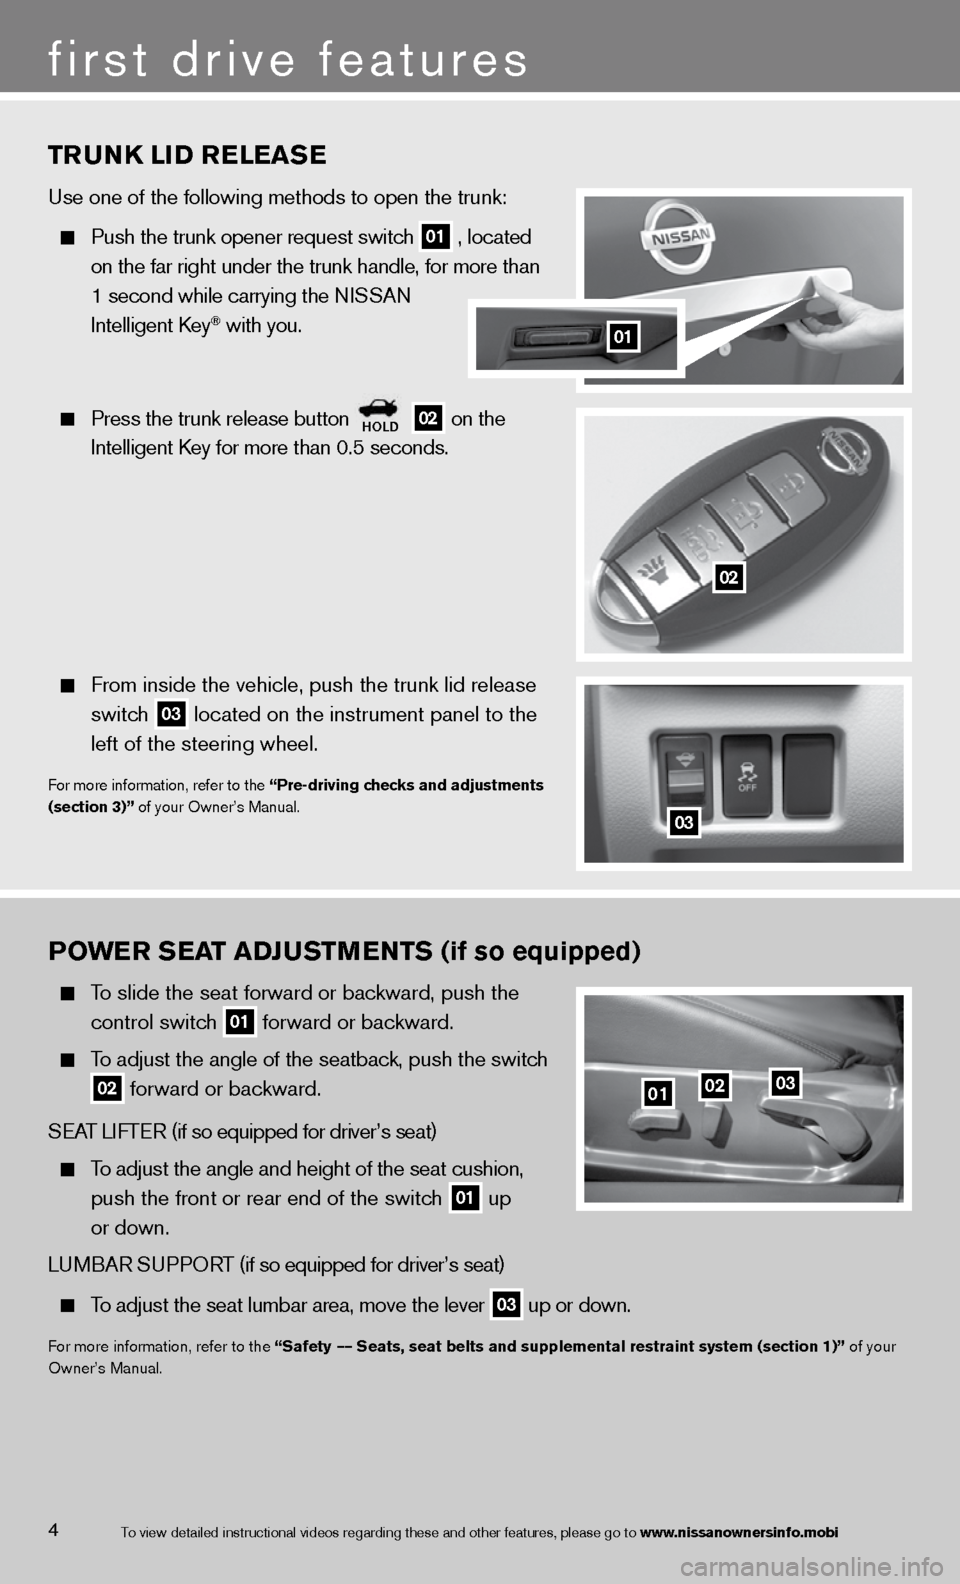 NISSAN ALTIMA COUPE 2013 D32 / 4.G Quick Reference Guide POWER SEAT ADJUSTMENTS (if so equipped)
  To  slide the seat forward or backward, push the 
    control switch
 
01 forward or backward. 
 
  To adjust the angle of the seatback, push the switch
 
  
